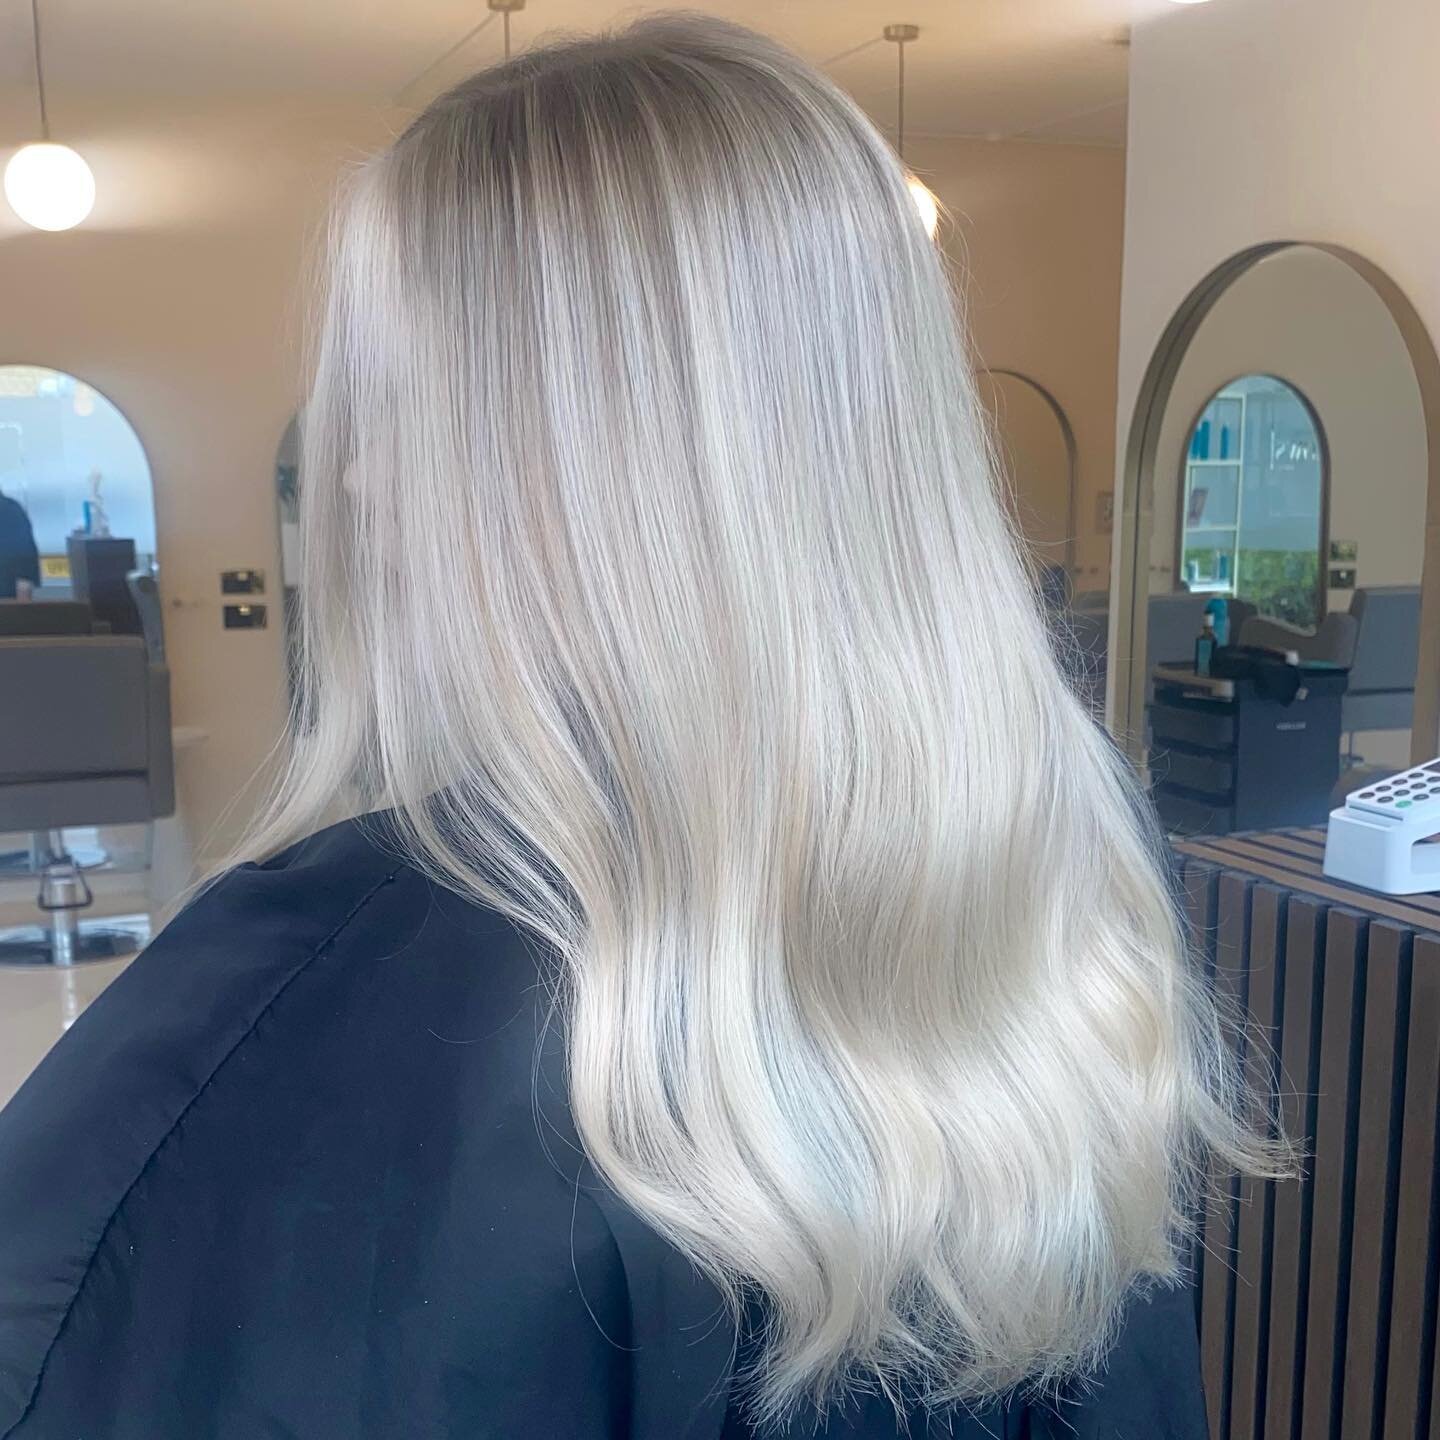 𝐒𝐔𝐌𝐌𝐄𝐑 𝐒𝐄𝐀𝐒𝐎𝐍 𝐈𝐍𝐂𝐎𝐌𝐈𝐍𝐆

New hair day for @pj.beth today using @moroccanoil colour 

Full Head Blonding using Blonde Voyage 

Root Shadow - Color Rhapsody 6/00 + 10vol
Mids &amp; Ends - Color Rhapsody 10/2 + 10.13 + 10vol 

Hair by